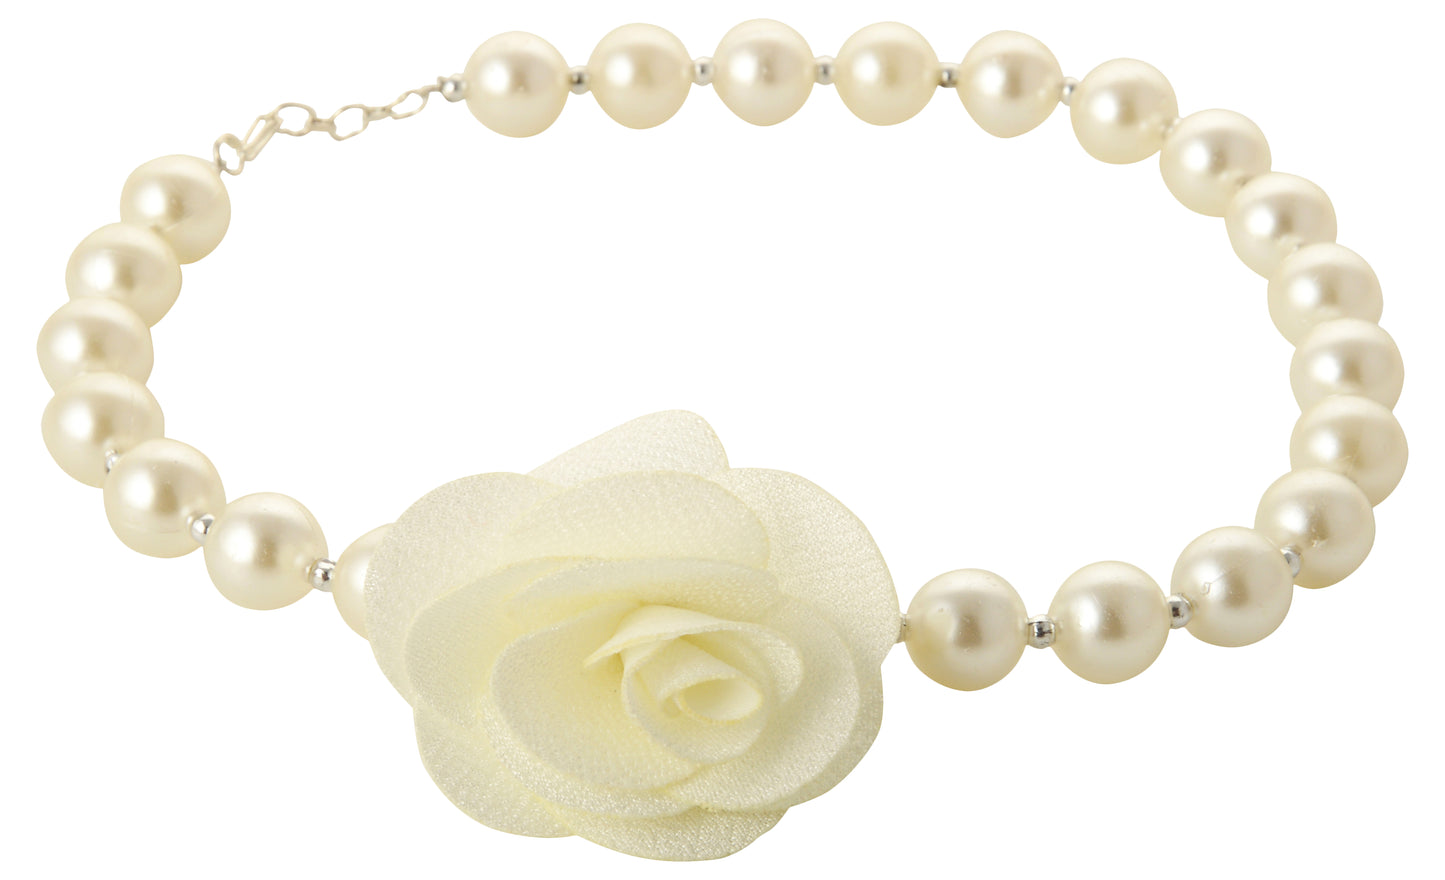 White Pearl Necklace & Bracelet With Rose